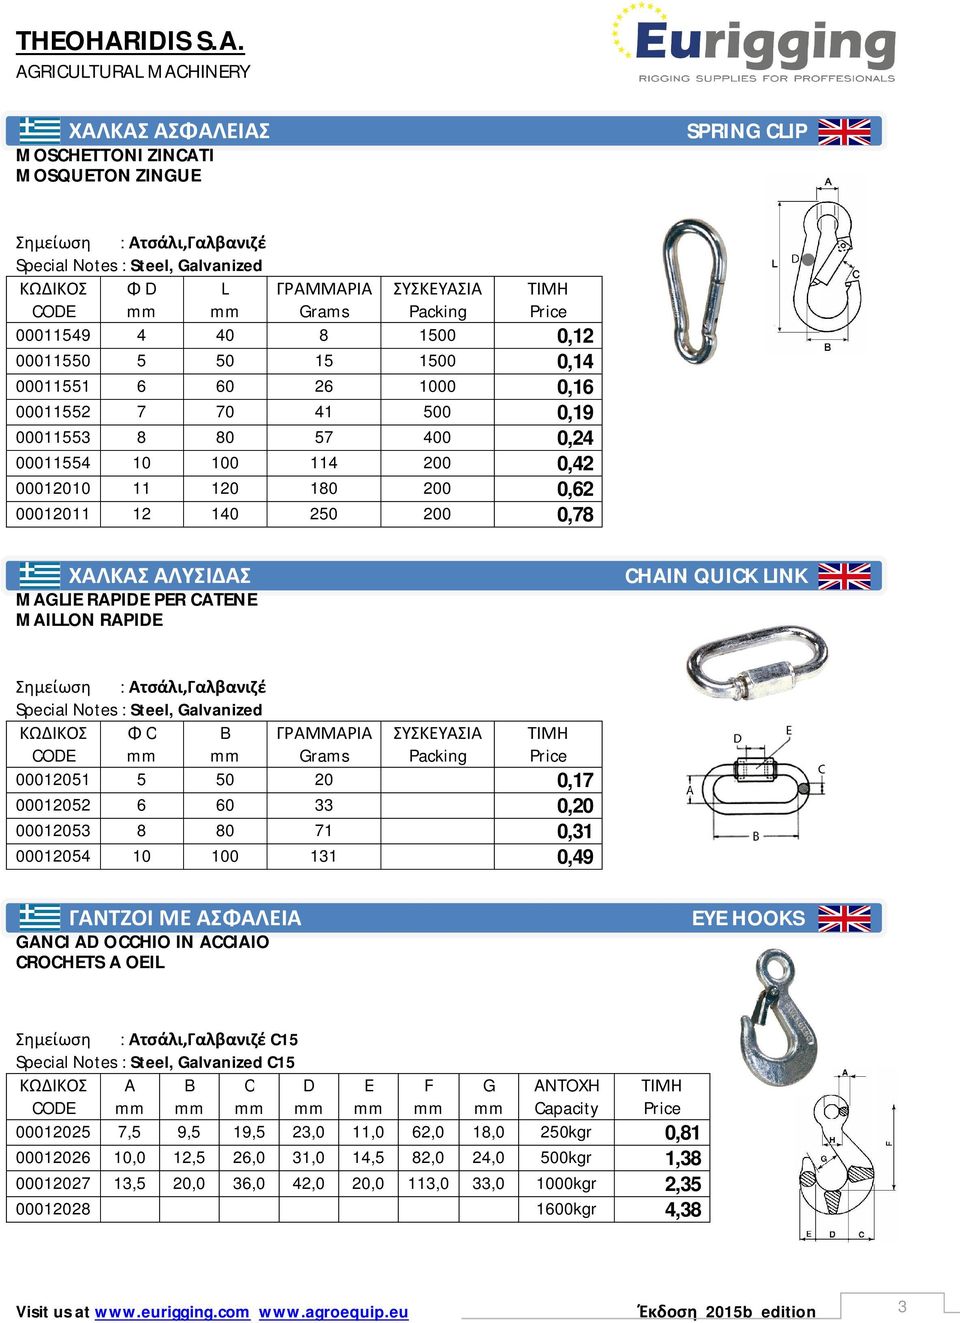 RAPIDE PER CATENE MAILLON RAPIDE CHAIN QUICK LINK Σημείωση : Ατσάλι,Γαλβανιζέ Special Notes : Steel, Galvanized Φ C B ΓΡΑΜΜΑΡΙΑ Grams 00012051 5 50 20 0,17 00012052 6 60 33 0,20 00012053 8 80 71 0,31